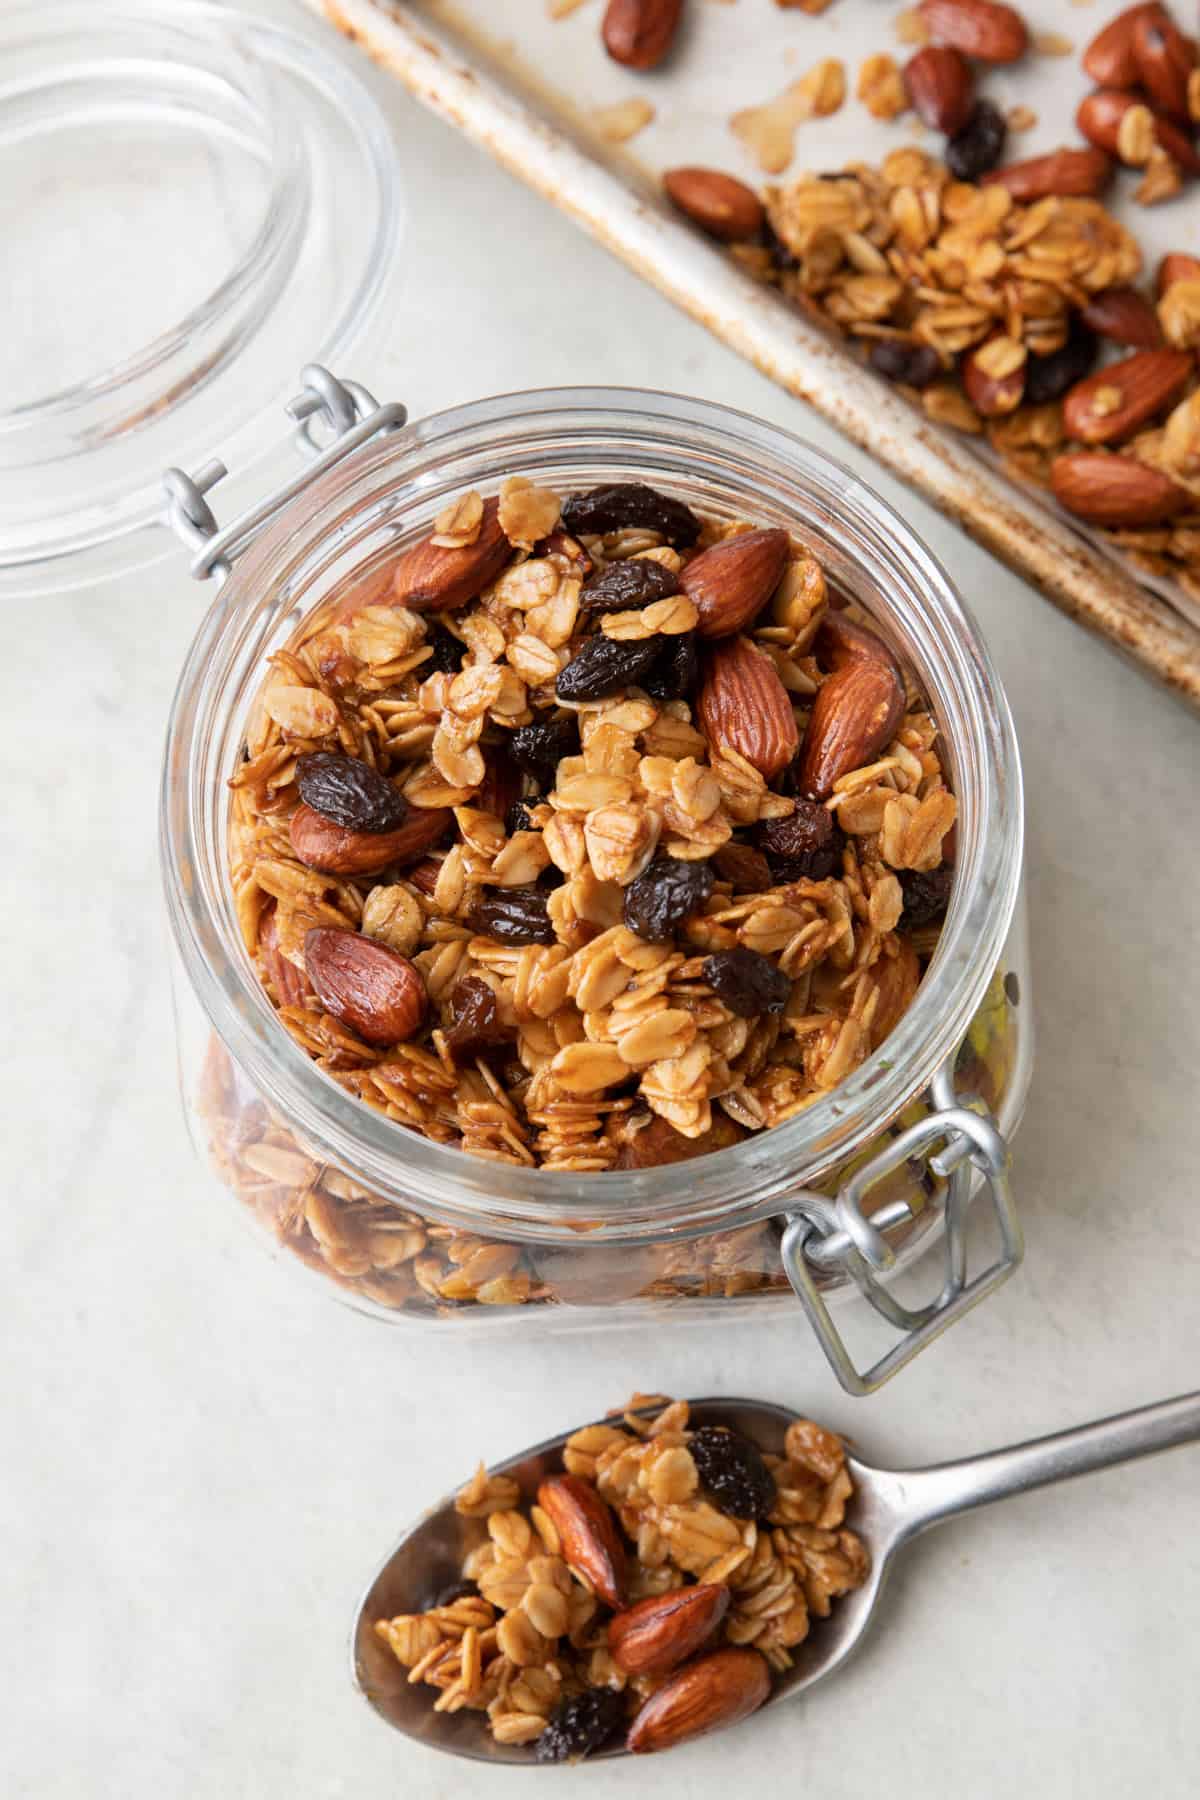 Top down view of homemade granola in an opened small jar with lid, a spoon sitting infront with some on it, and a baking sheet with recipe behind jar.